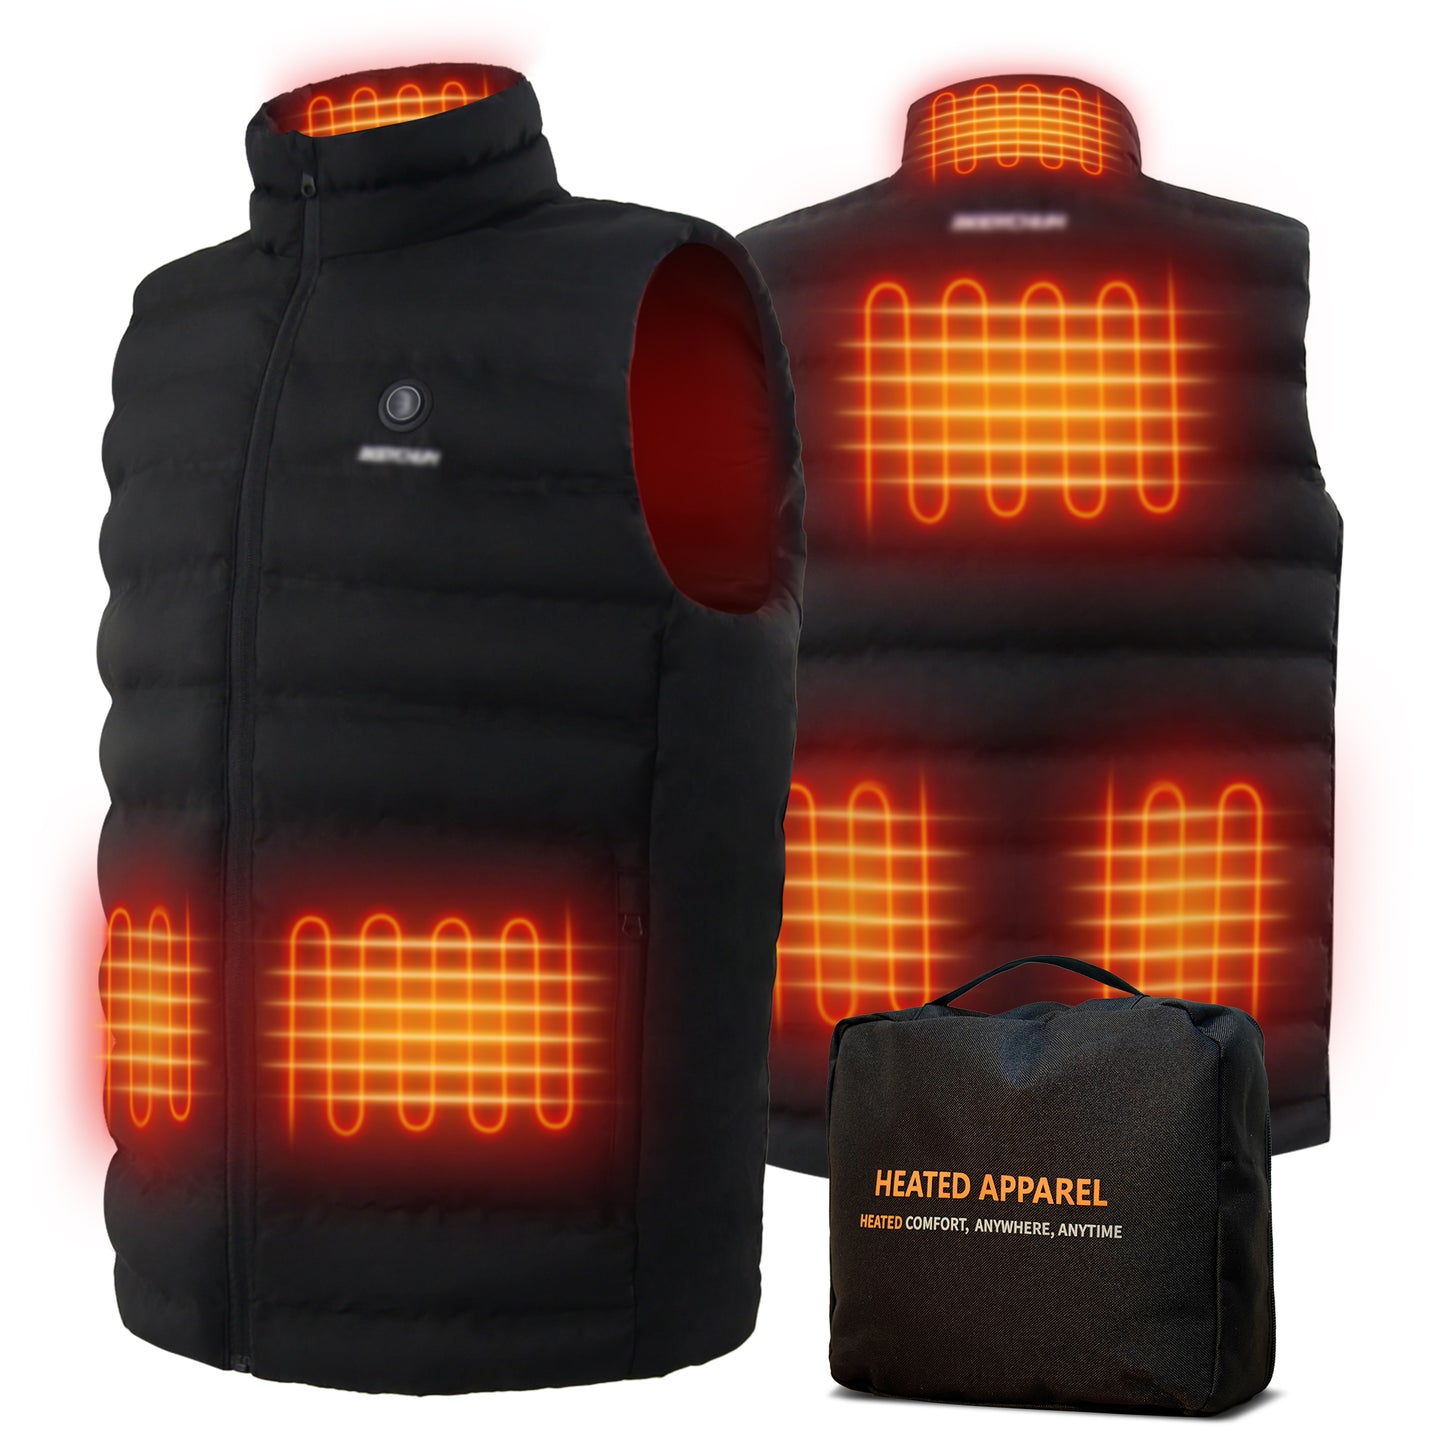 Aptoco Men Women Electric Heated Vest Includes USB Charging Battery, 6 Zones 3 Heated Modes Winter Outdoor Jacket for Skiing, L, Christmas Gifts